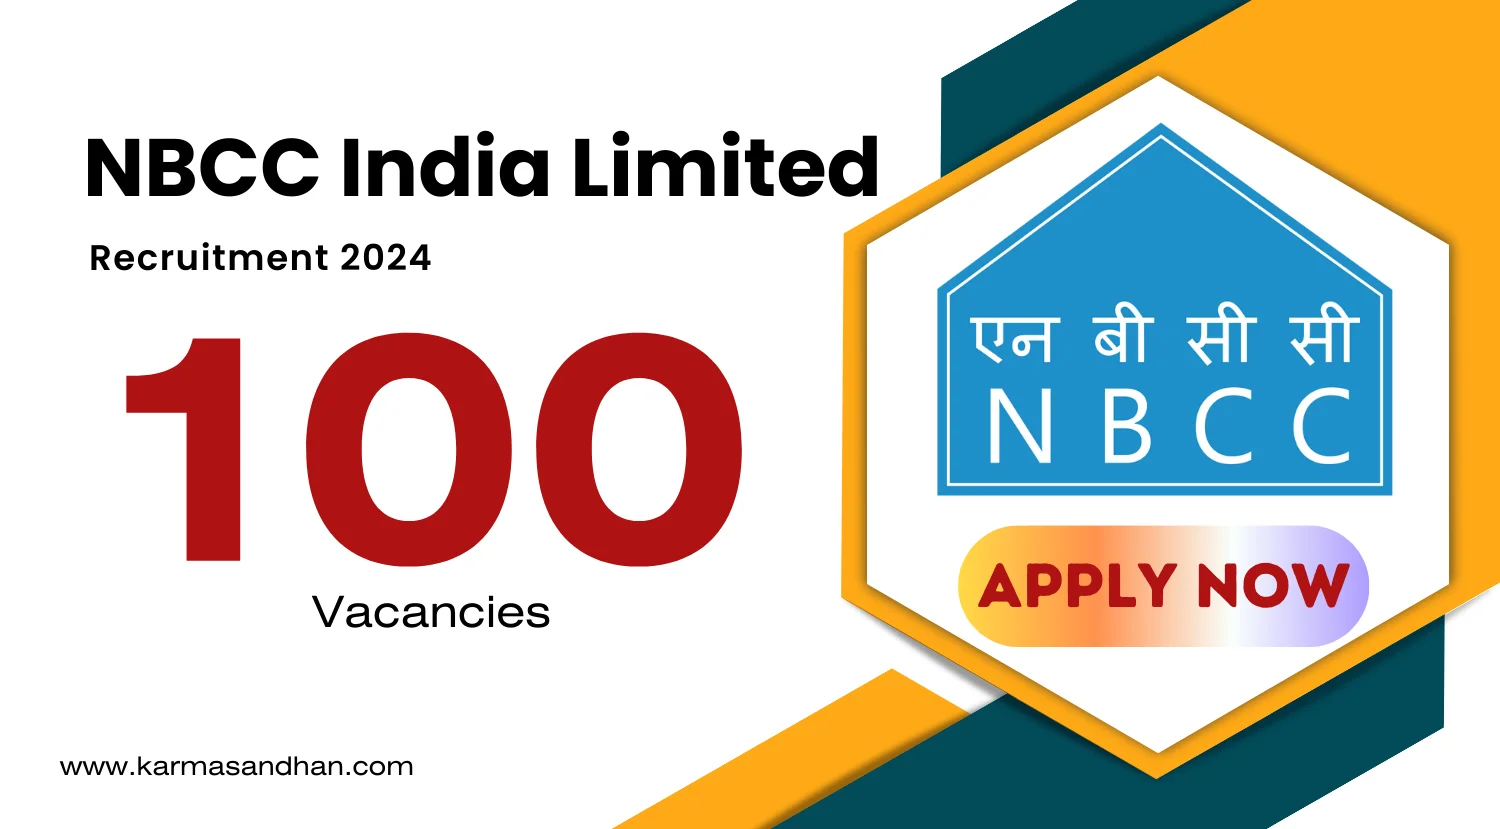 NBCC Recruitment 2024 Notification for 100 Manager, Trainee, Assistant and More